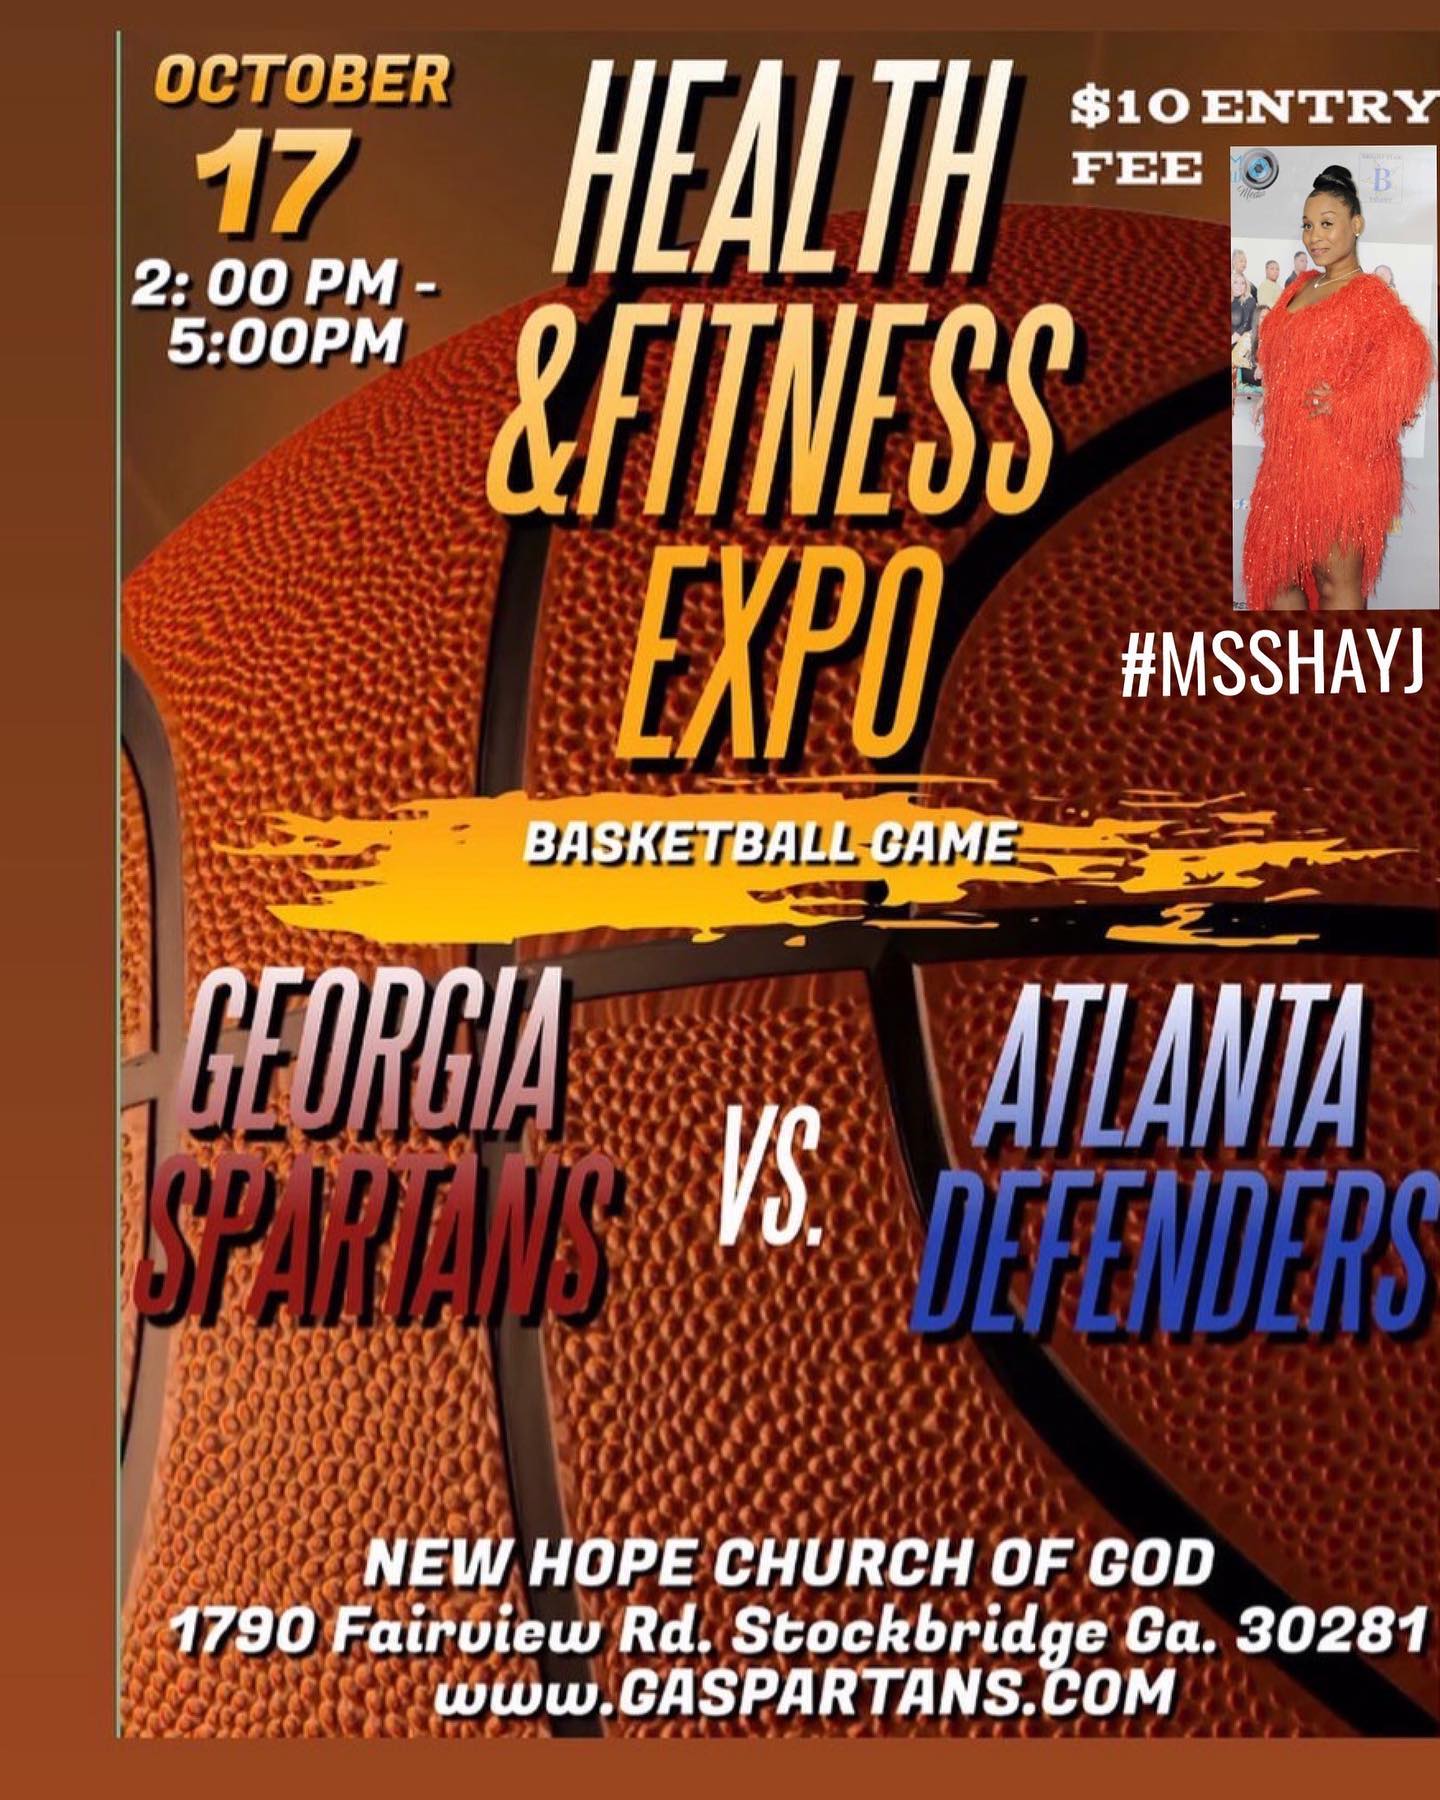 @msshayj will be in the building!!!ATL....10/17 2pm -5pm come check out the Health & Fitness Expo Basketball Game!!! Of course my